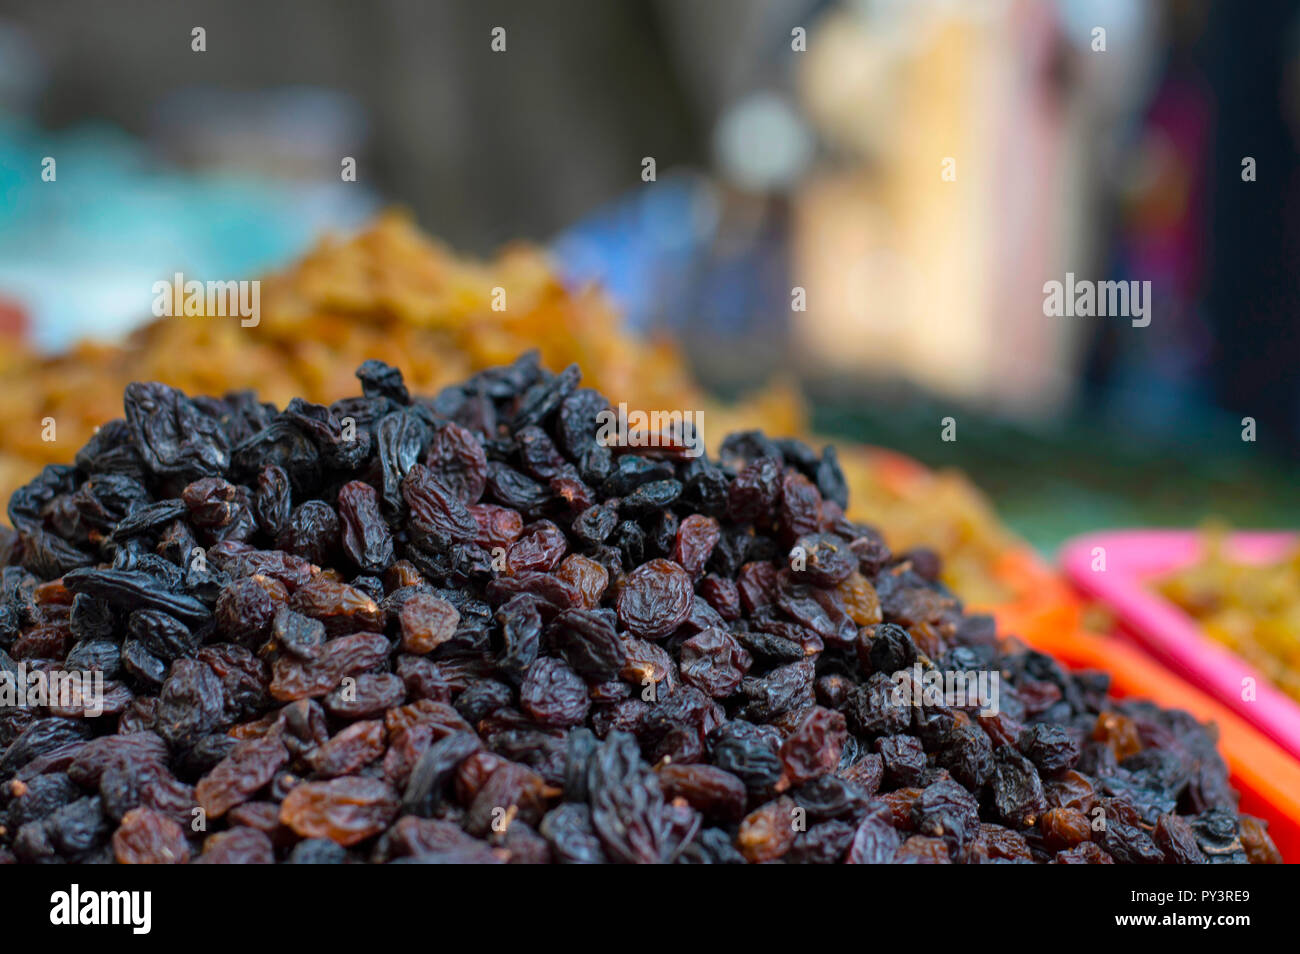 Close up of black dried grapes for sale in local market, Pune Maharashtra. Stock Photo